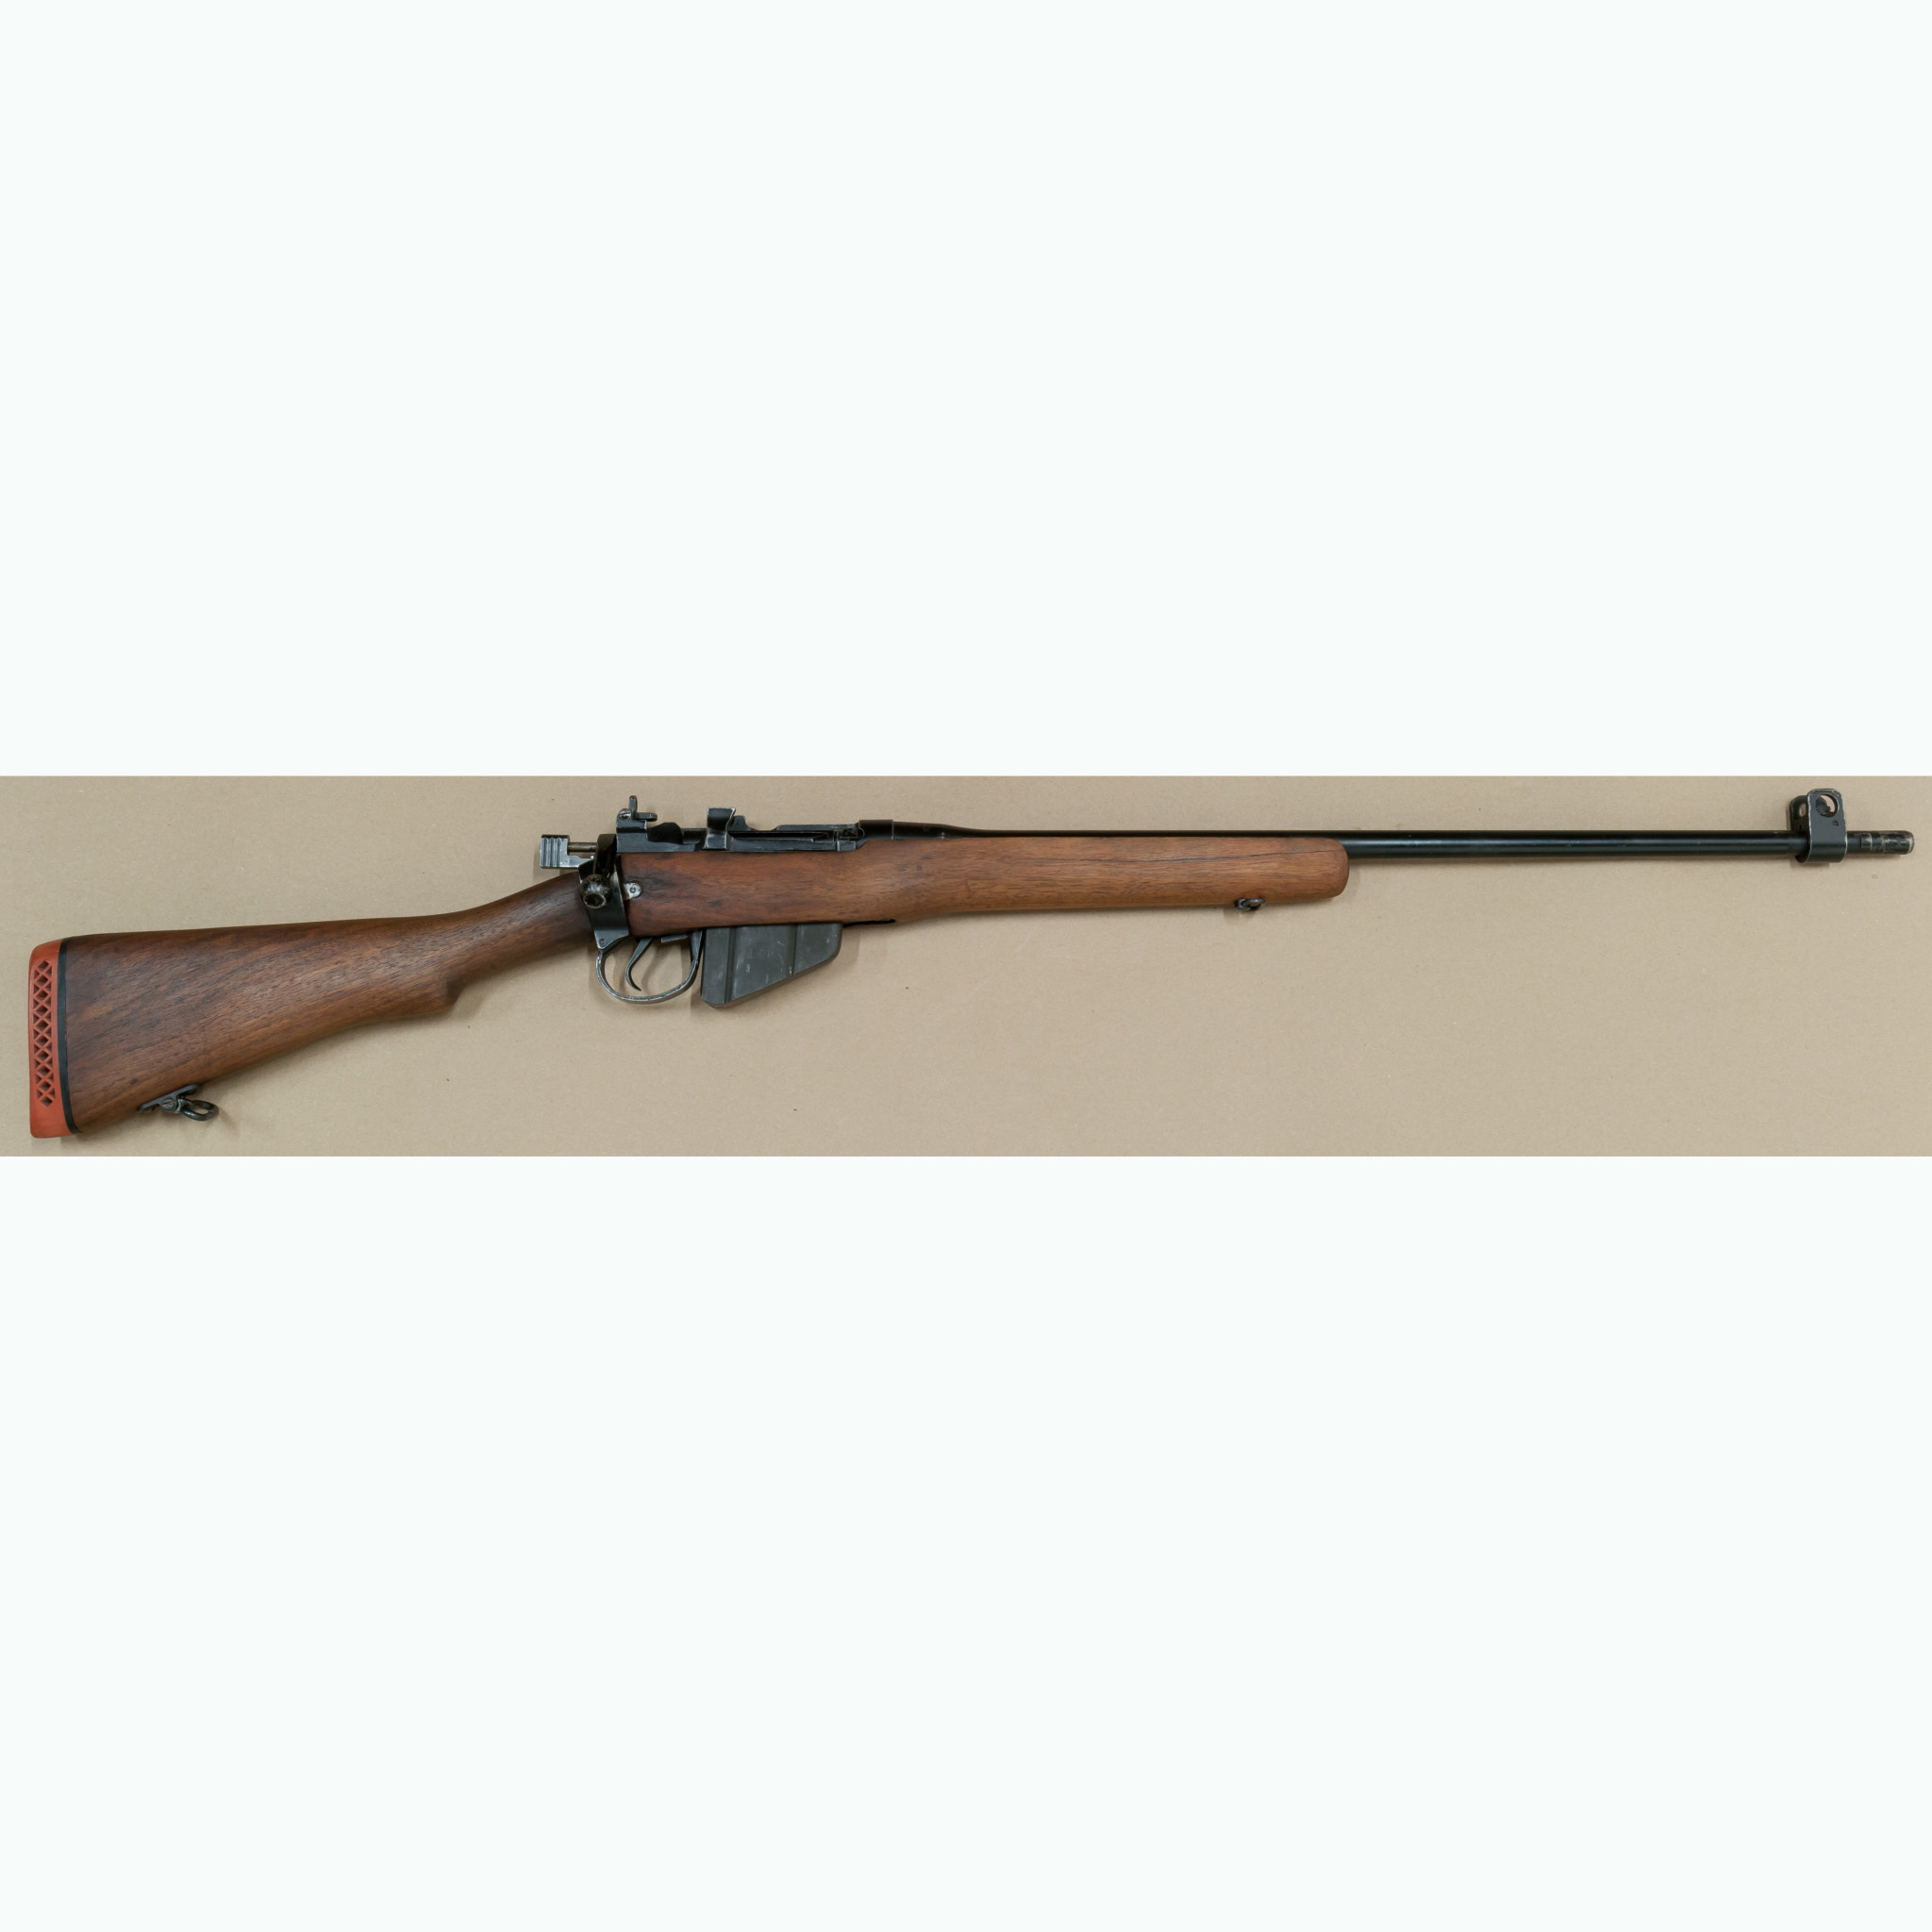 P* LEE ENFIELD NO4 MK1 .303 BRITISH BOLT ACTION RIFLE (MATCHING BOLT)  SERIAL #90L4337, LONGBRANCH - Able Auctions